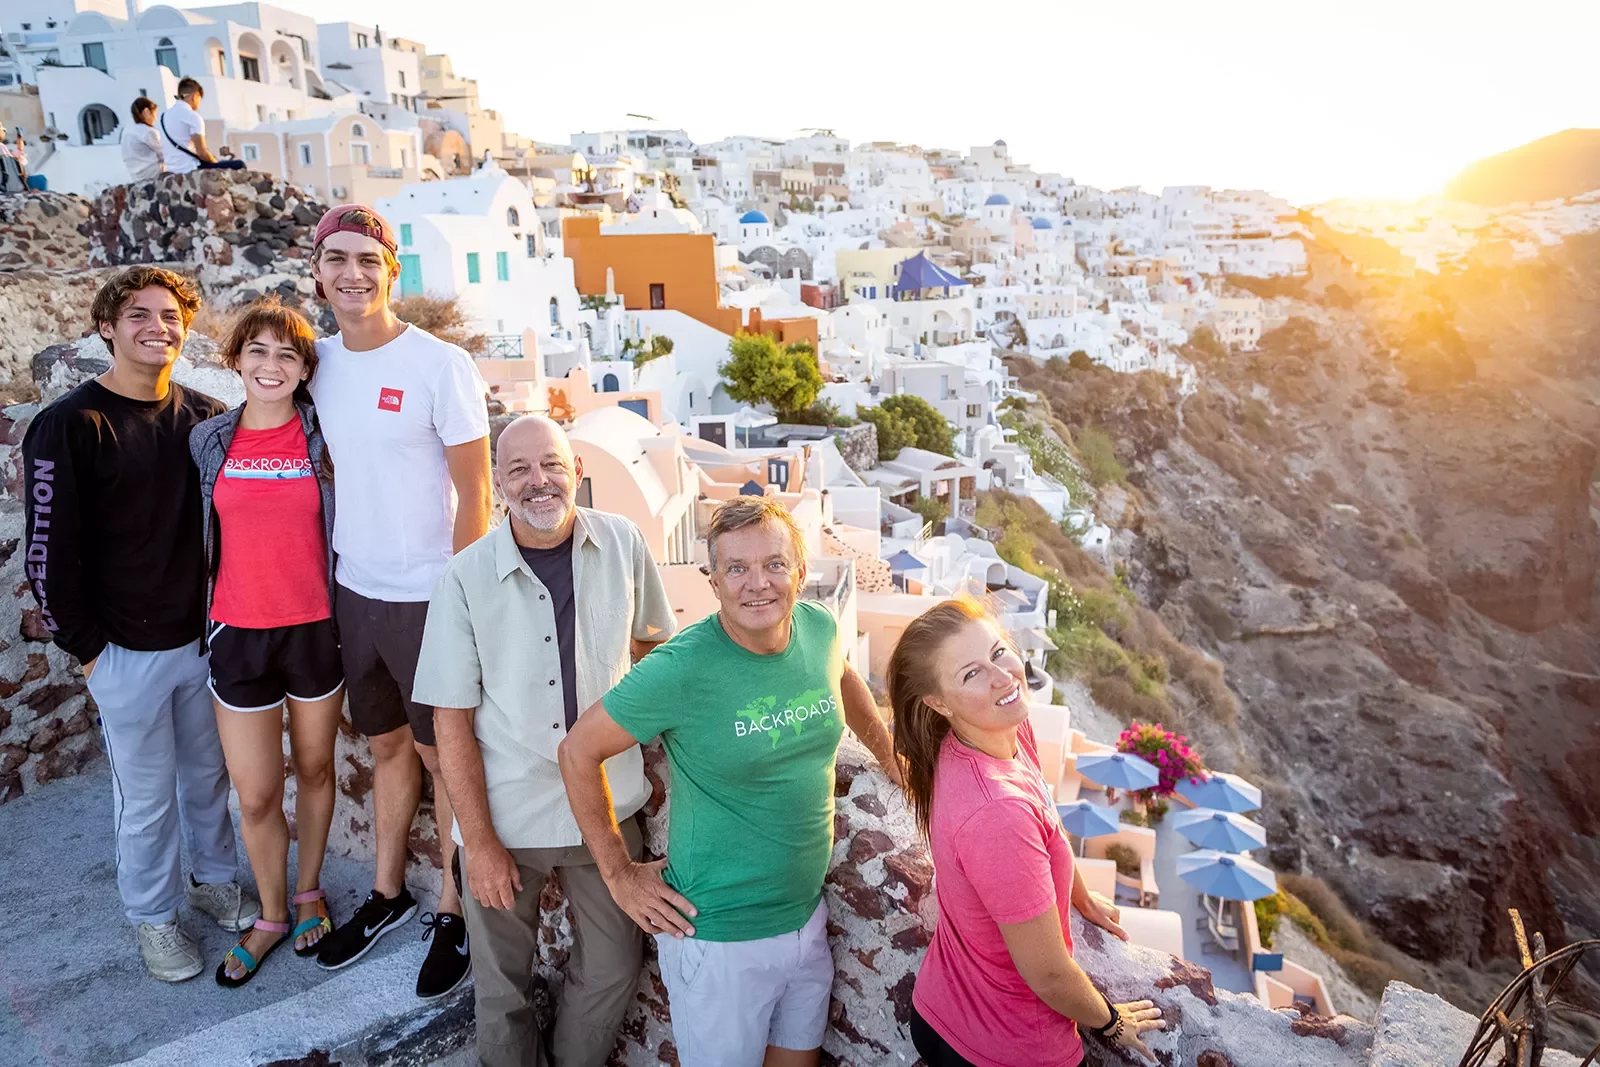 Group of guests among cliffside, whit houses, sunset behind them.